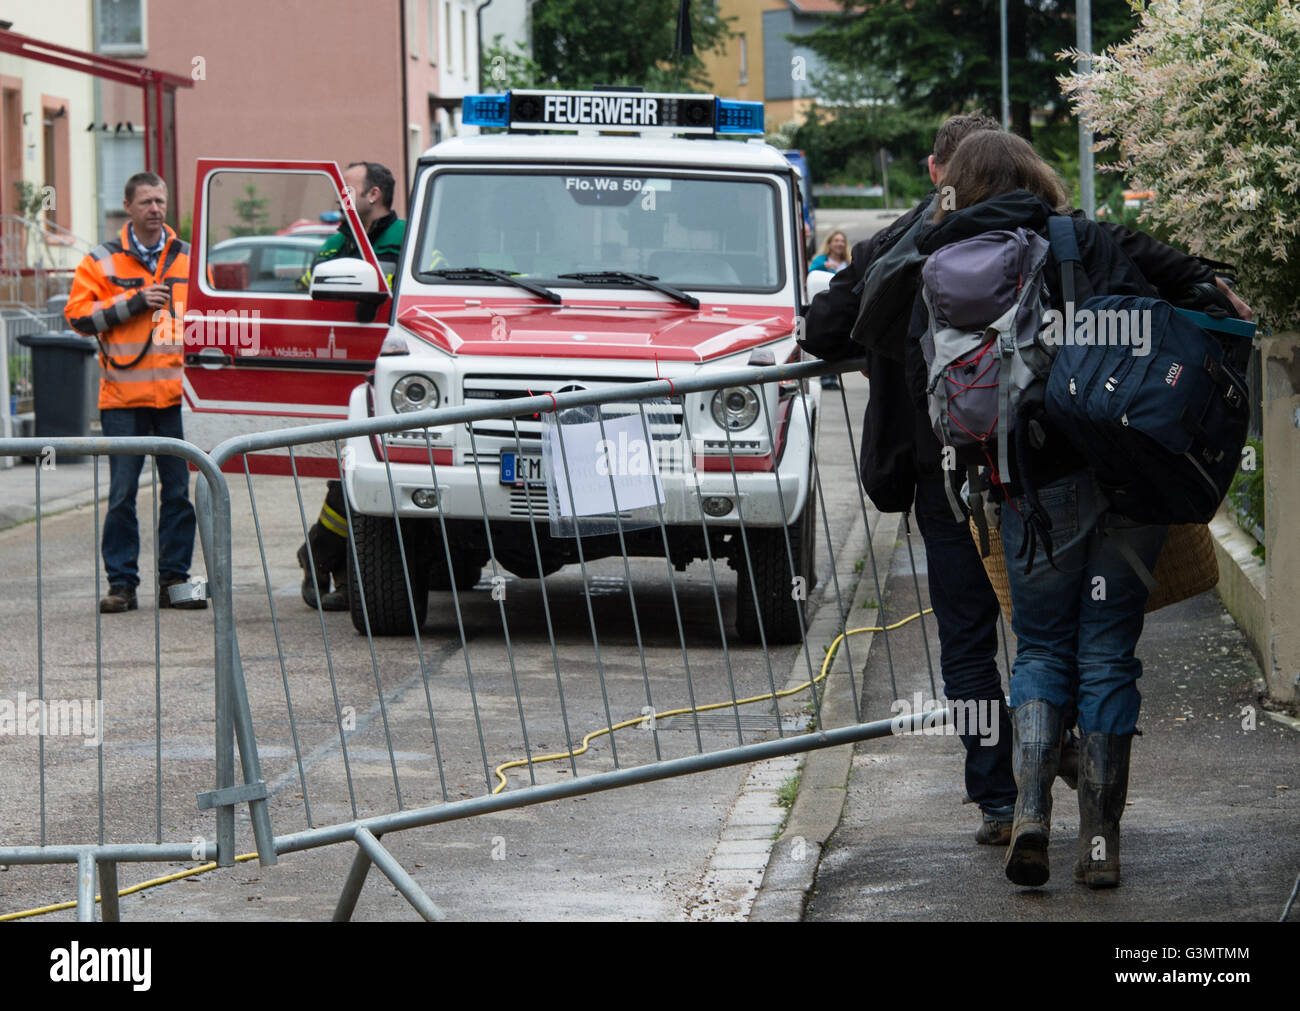 Waldkirch, Germany. 14th June, 2016. Evacuated residents take urgently needed things from the house in a backpack in Waldkirch, Germany, 14 June 2016. Around 30 centimeters of mud lie on the street following a landslide. Four houses needed to be evacuated. Photo: PATRICK SEEGER/dpa/Alamy Live News Stock Photo